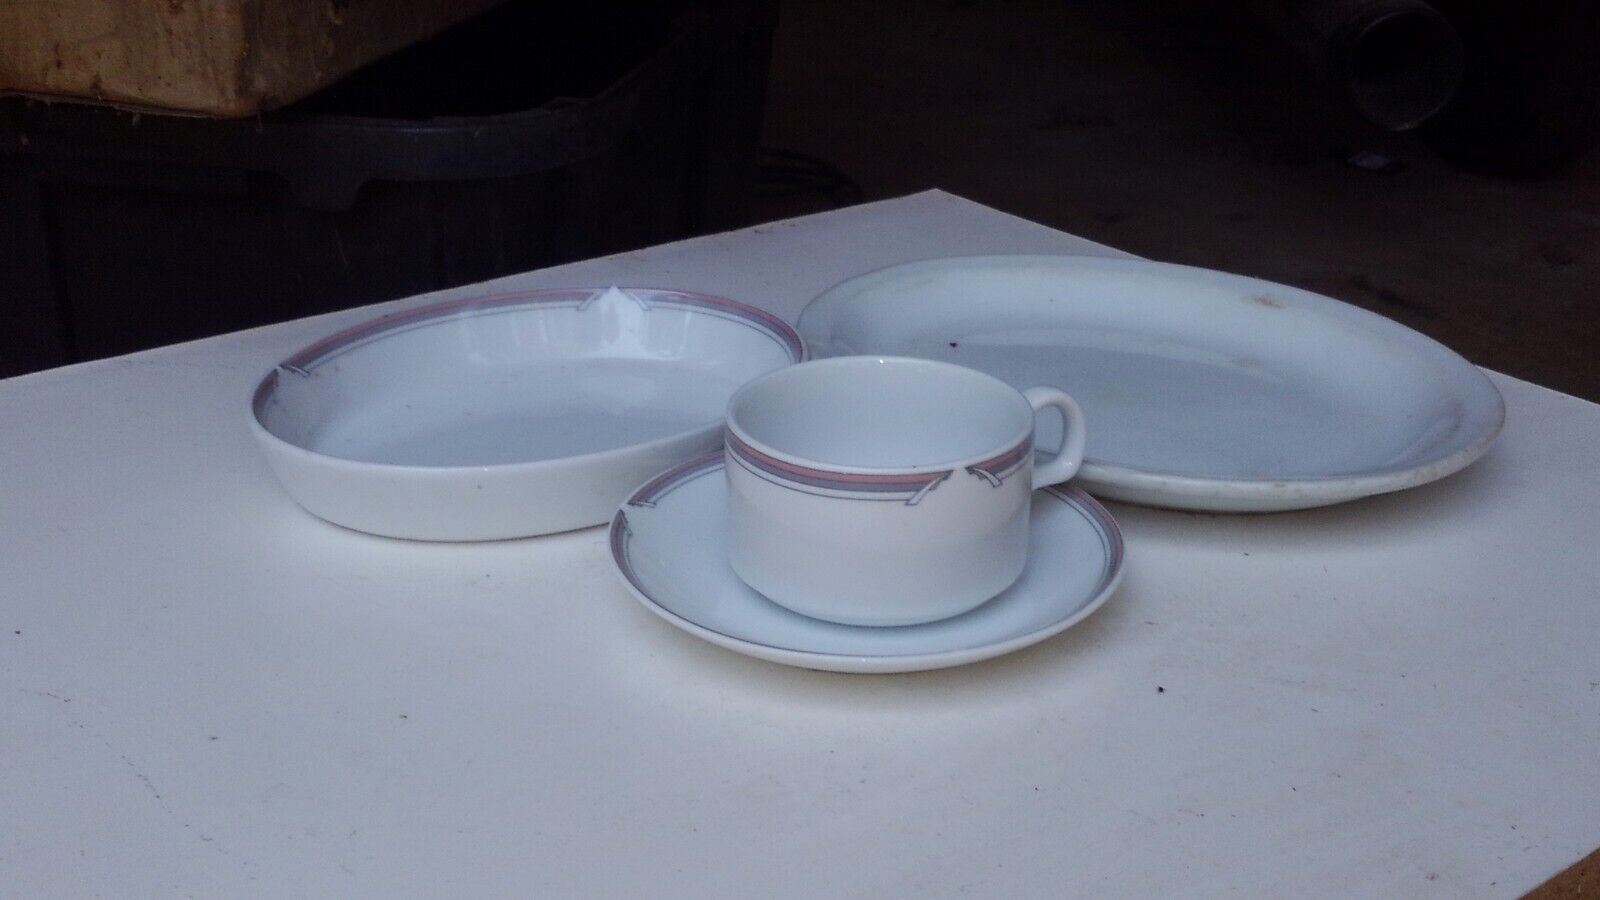 Noritake China United Airlines Tea/coffee cups,Saucers, Appitizer, Dinner Plates